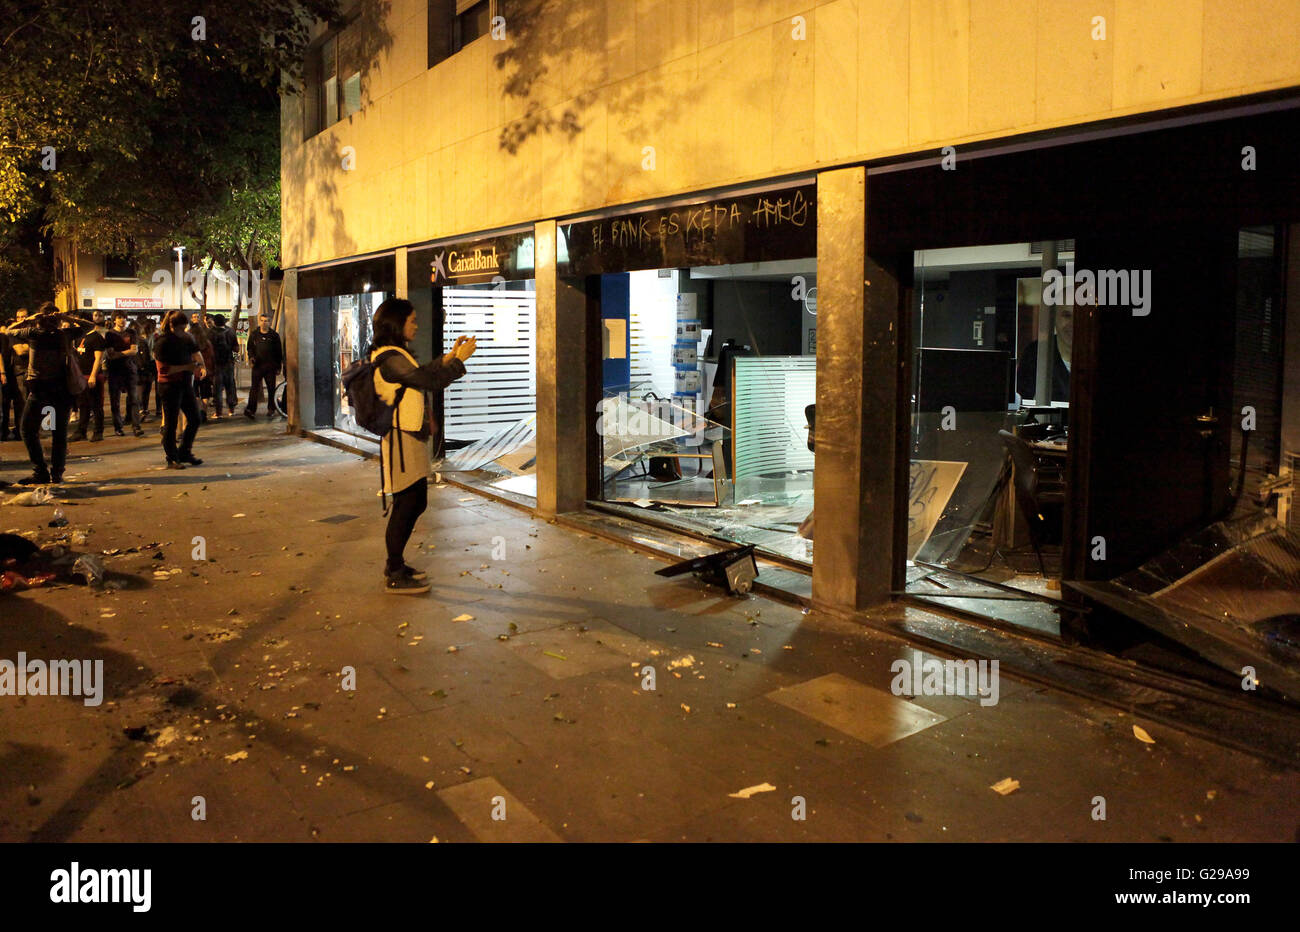 Barcelona, Spain. 25th May, 2016. Riot Police and activists clash again this evening for the third night in succession in the Gracia district of Barcelona, catalonia. windows of Banks smashed adding to the thousands of Euros damage caused in last 3 days since the squatters were forced out from an empty bank building in the area. Credit:  rich bowen/Alamy Live News Stock Photo